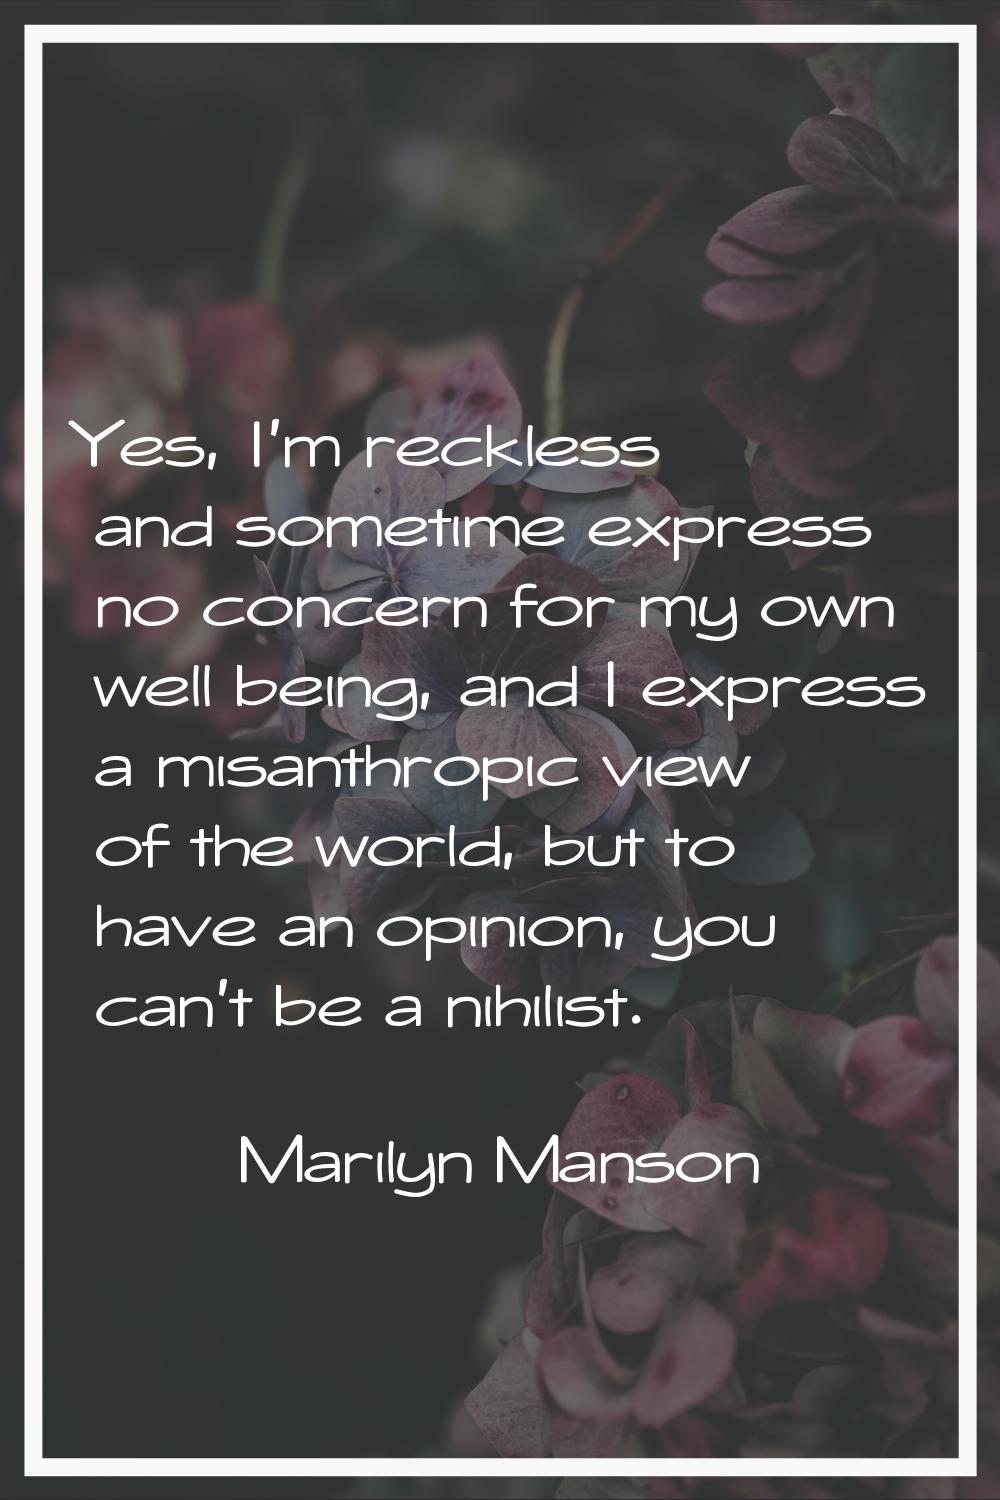 Yes, I'm reckless and sometime express no concern for my own well being, and I express a misanthrop